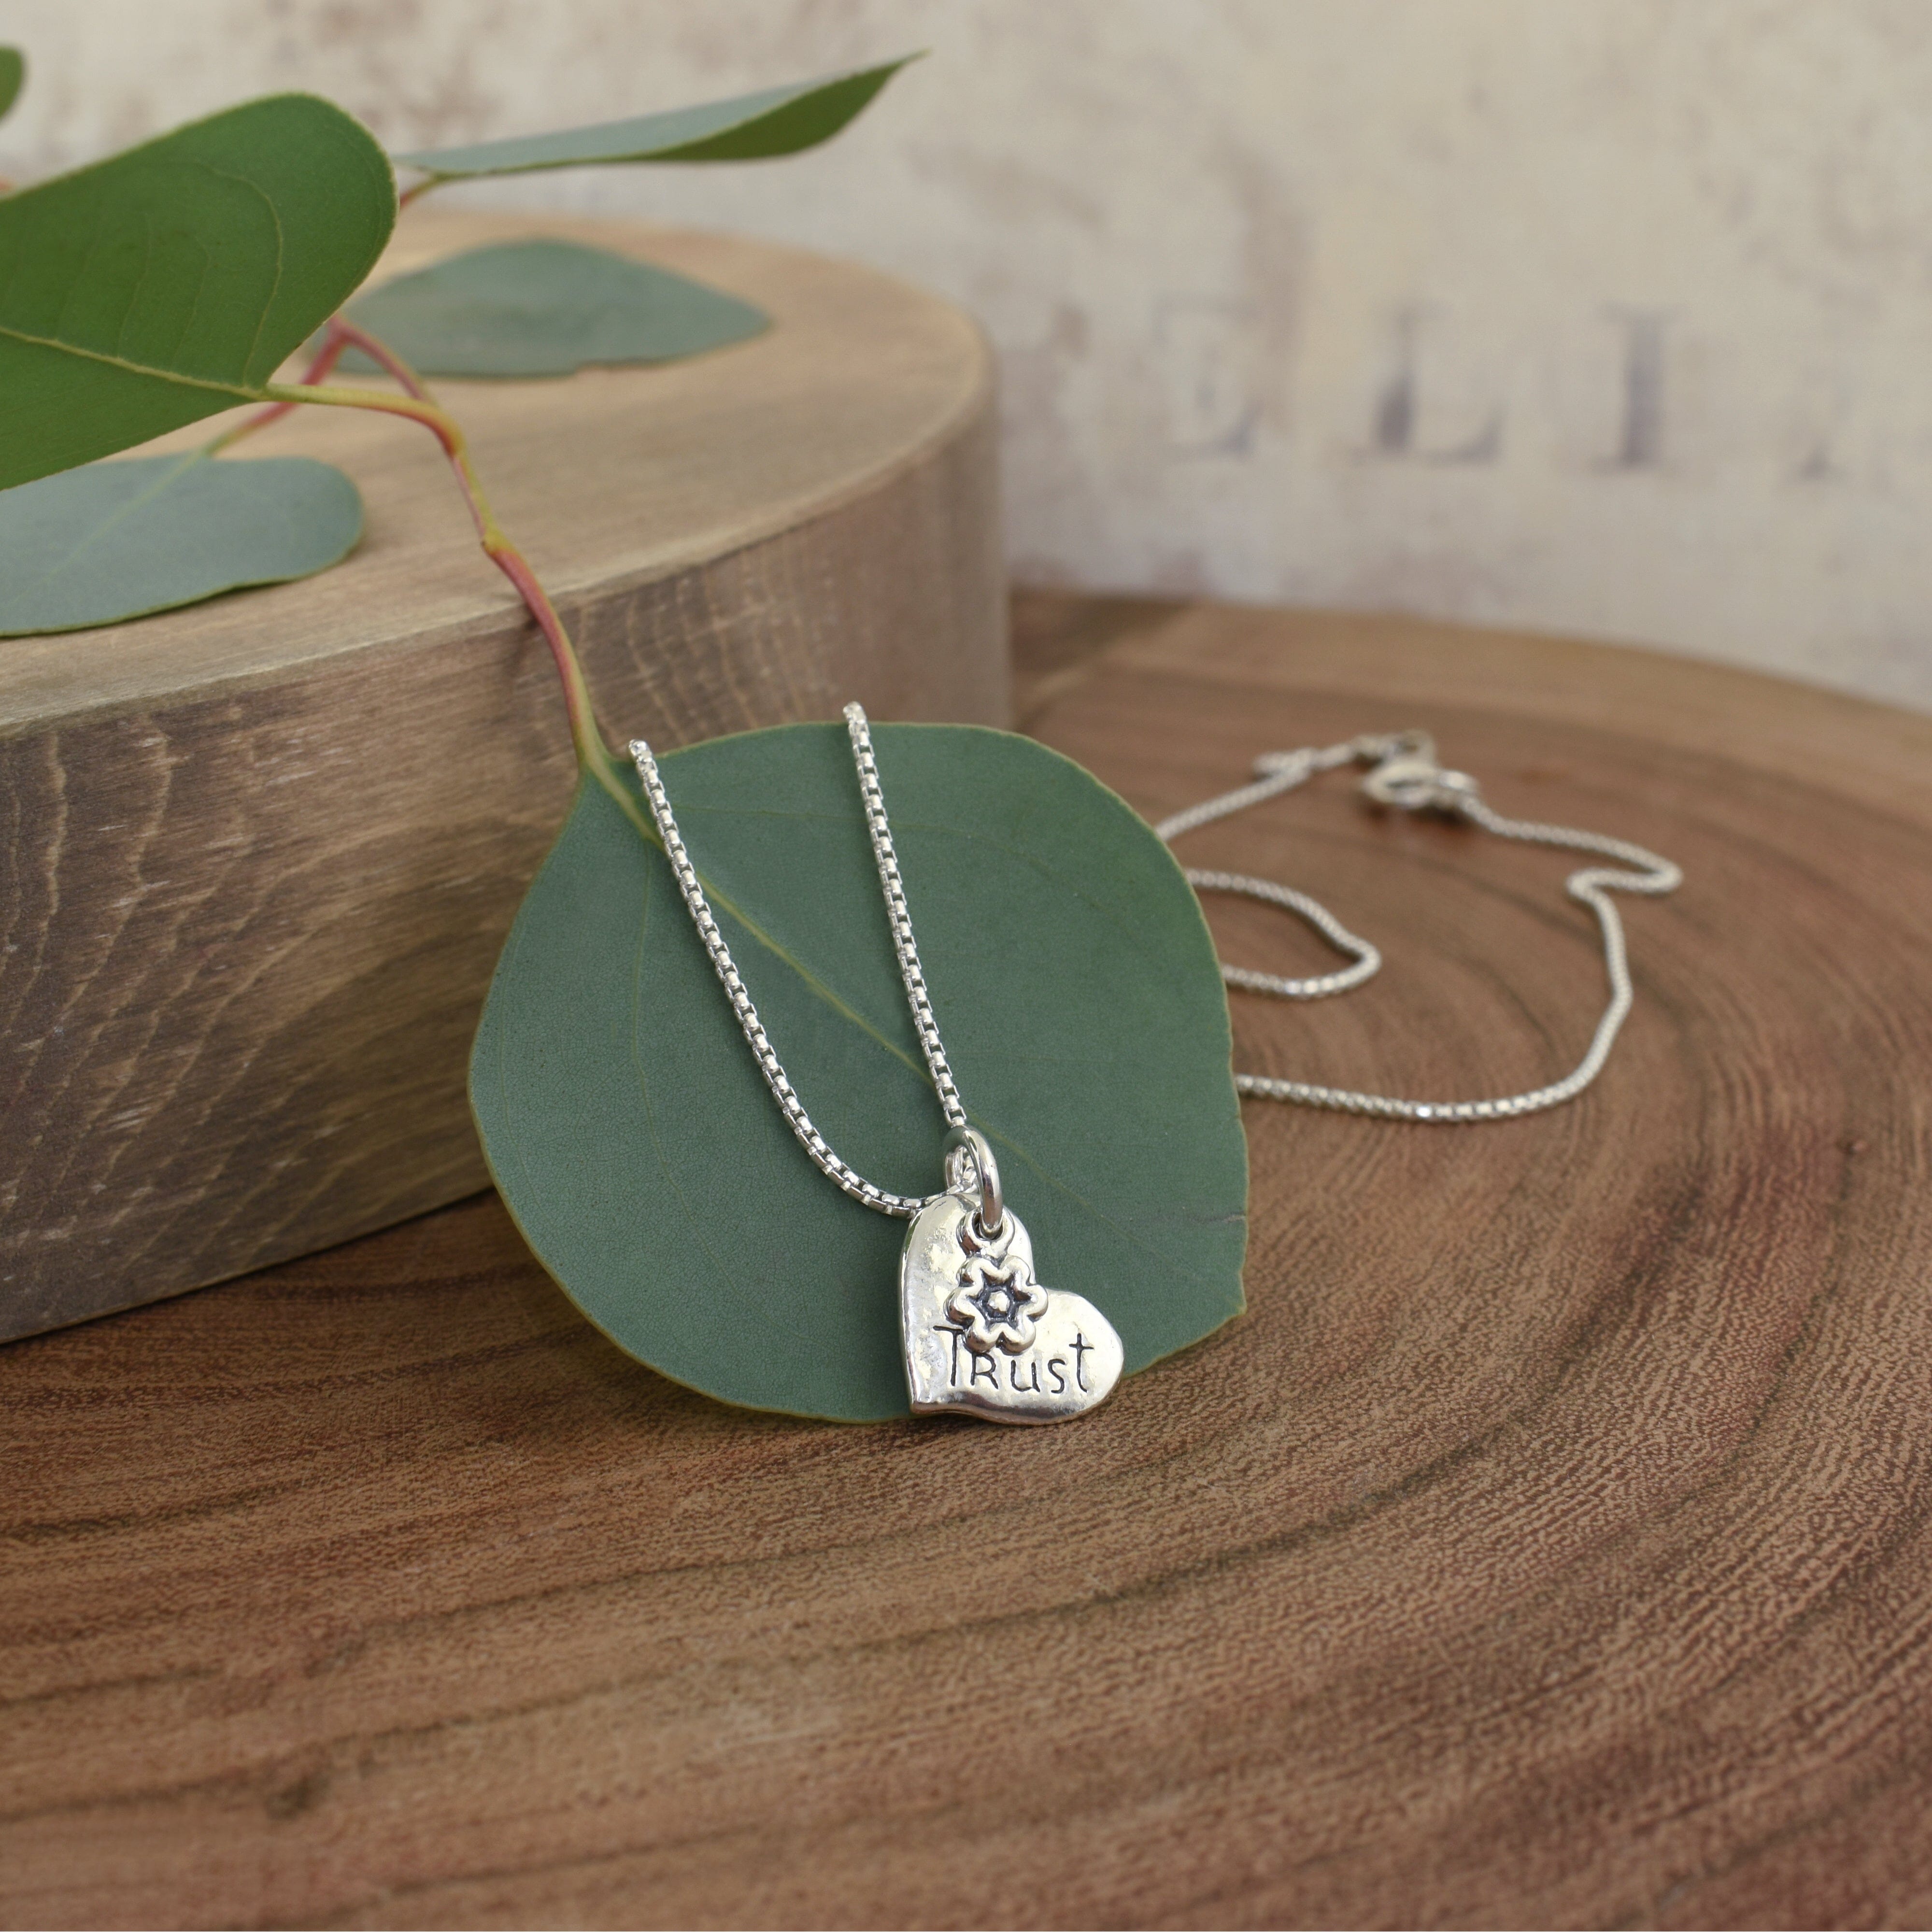 dainty sterling silver heart necklace hand-stamped with the word trust